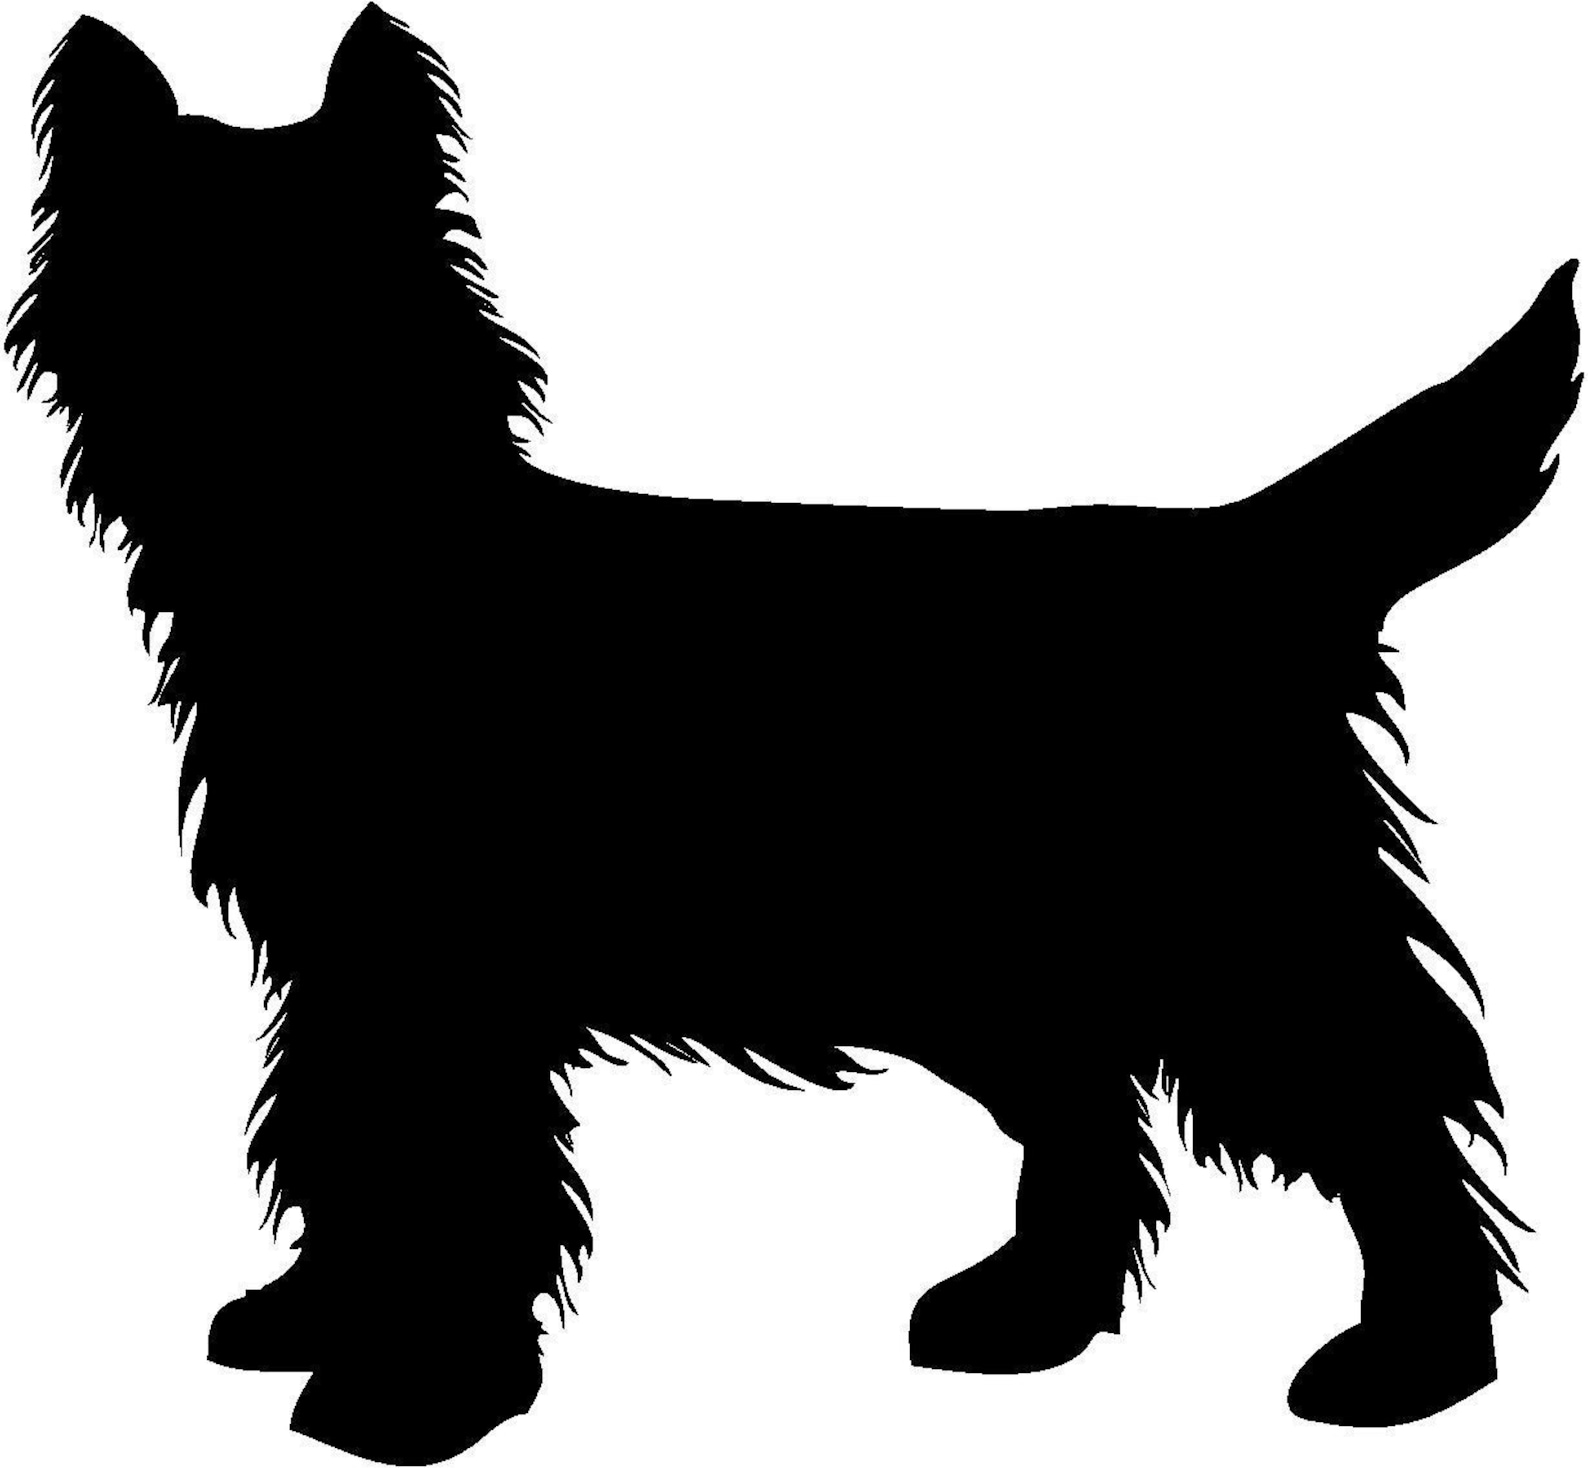 Cairn Terrier Dog Vector Graphic SVG Silhouette | Etsy